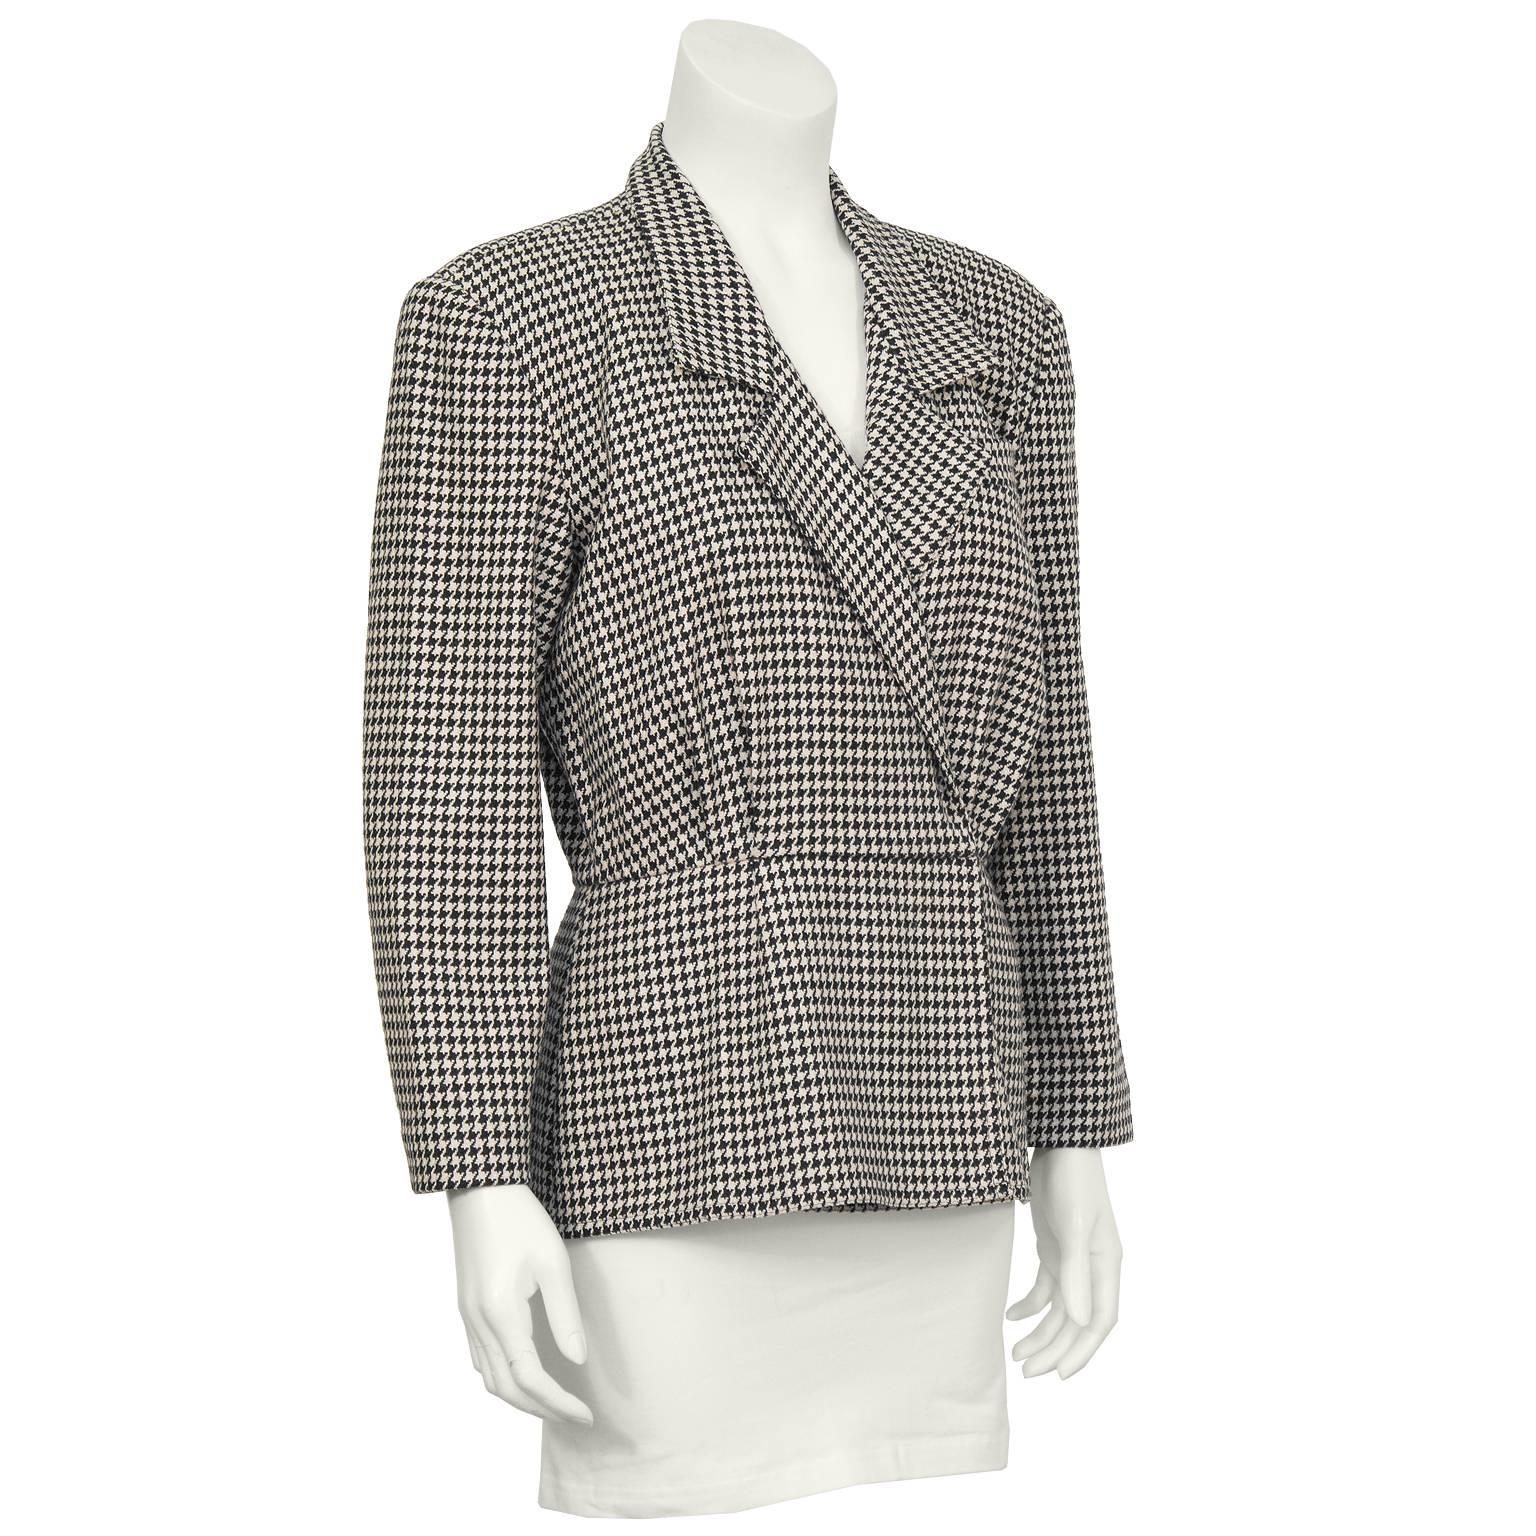 Unique fitted peplum style wool houndstooth check top from the first Michael Kors collection in 1981. The shirt style jacket has a retro 40's shape with an overlapping front that fastens on the inside with hidden flat hooks. Gathering at the bust,